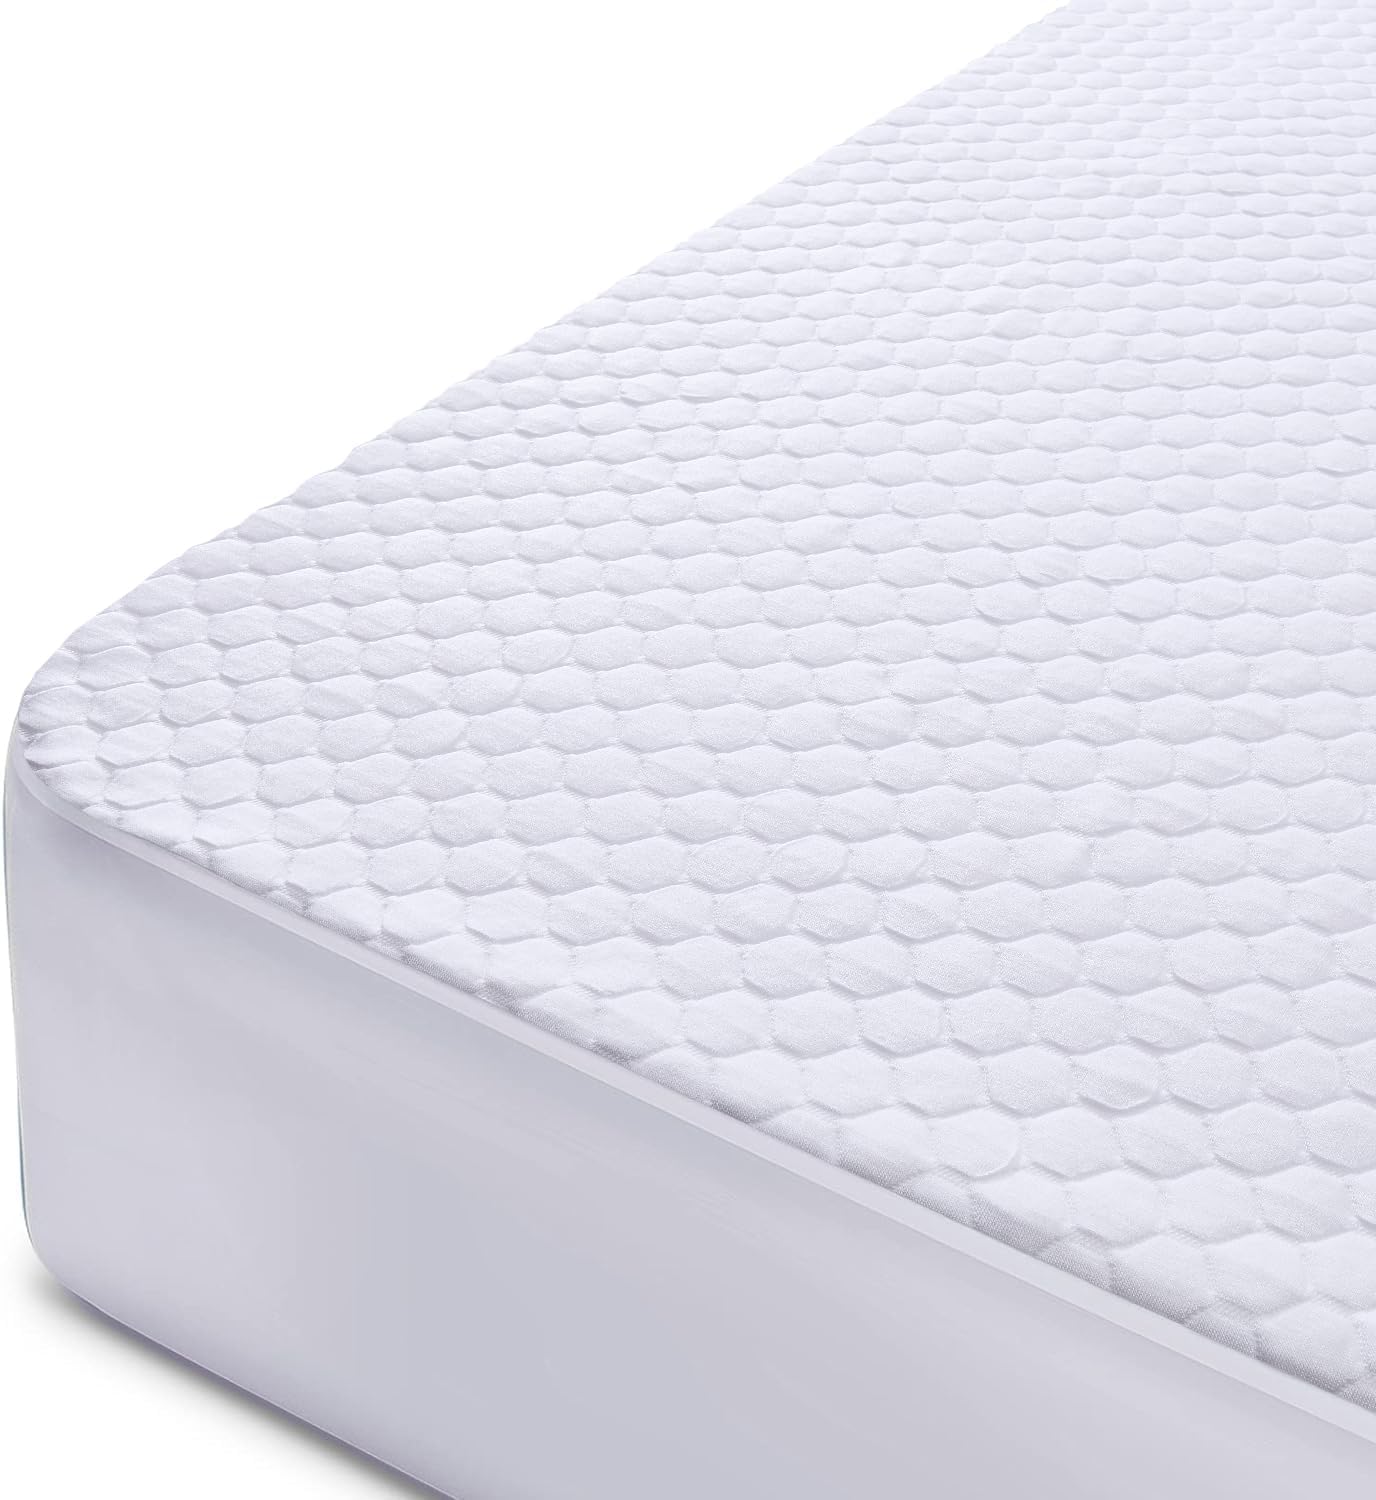 I have purchased the Premium 100% Waterproof Mattress Protector in Queen Size for our rental properties, we also got them for our spare bedrooms, especially when the grandchildren come over, and we couldn't be happier with the results.One of the standout features of these mattress protectors is the material, rayon, made from bamboo. Not only does it provide top-notch waterproof protection, but it also adds a touch of luxury to the bed. The texture is soft and comfortable, and it doesn't feel like the typical vinyl or plastic covers that often disrupt a good night' sleep.The best part These covers are truly noiseless! Unlike other protectors that crinkle and make noise every time you move, these stay silent and let you enjoy a peaceful night' sleep without any disturbances. The comfort is unmatched, and you won't even notice it' there beneath your sheets.Durability is another highlight. We've been using these protectors in our rental properties, where they face frequent use and washing, and they have held up exceptionally well. The fact that they are washable is a huge plus, easy maintenance is always appreciated, especially in high-traffic areas.Whether you're safeguarding your mattress from spills and accidents or simply want an extra layer of protection, these mattress protectors are a wise investment. They strike the perfect balance between functionality and comfort, making them suitable for both adults and children alike.